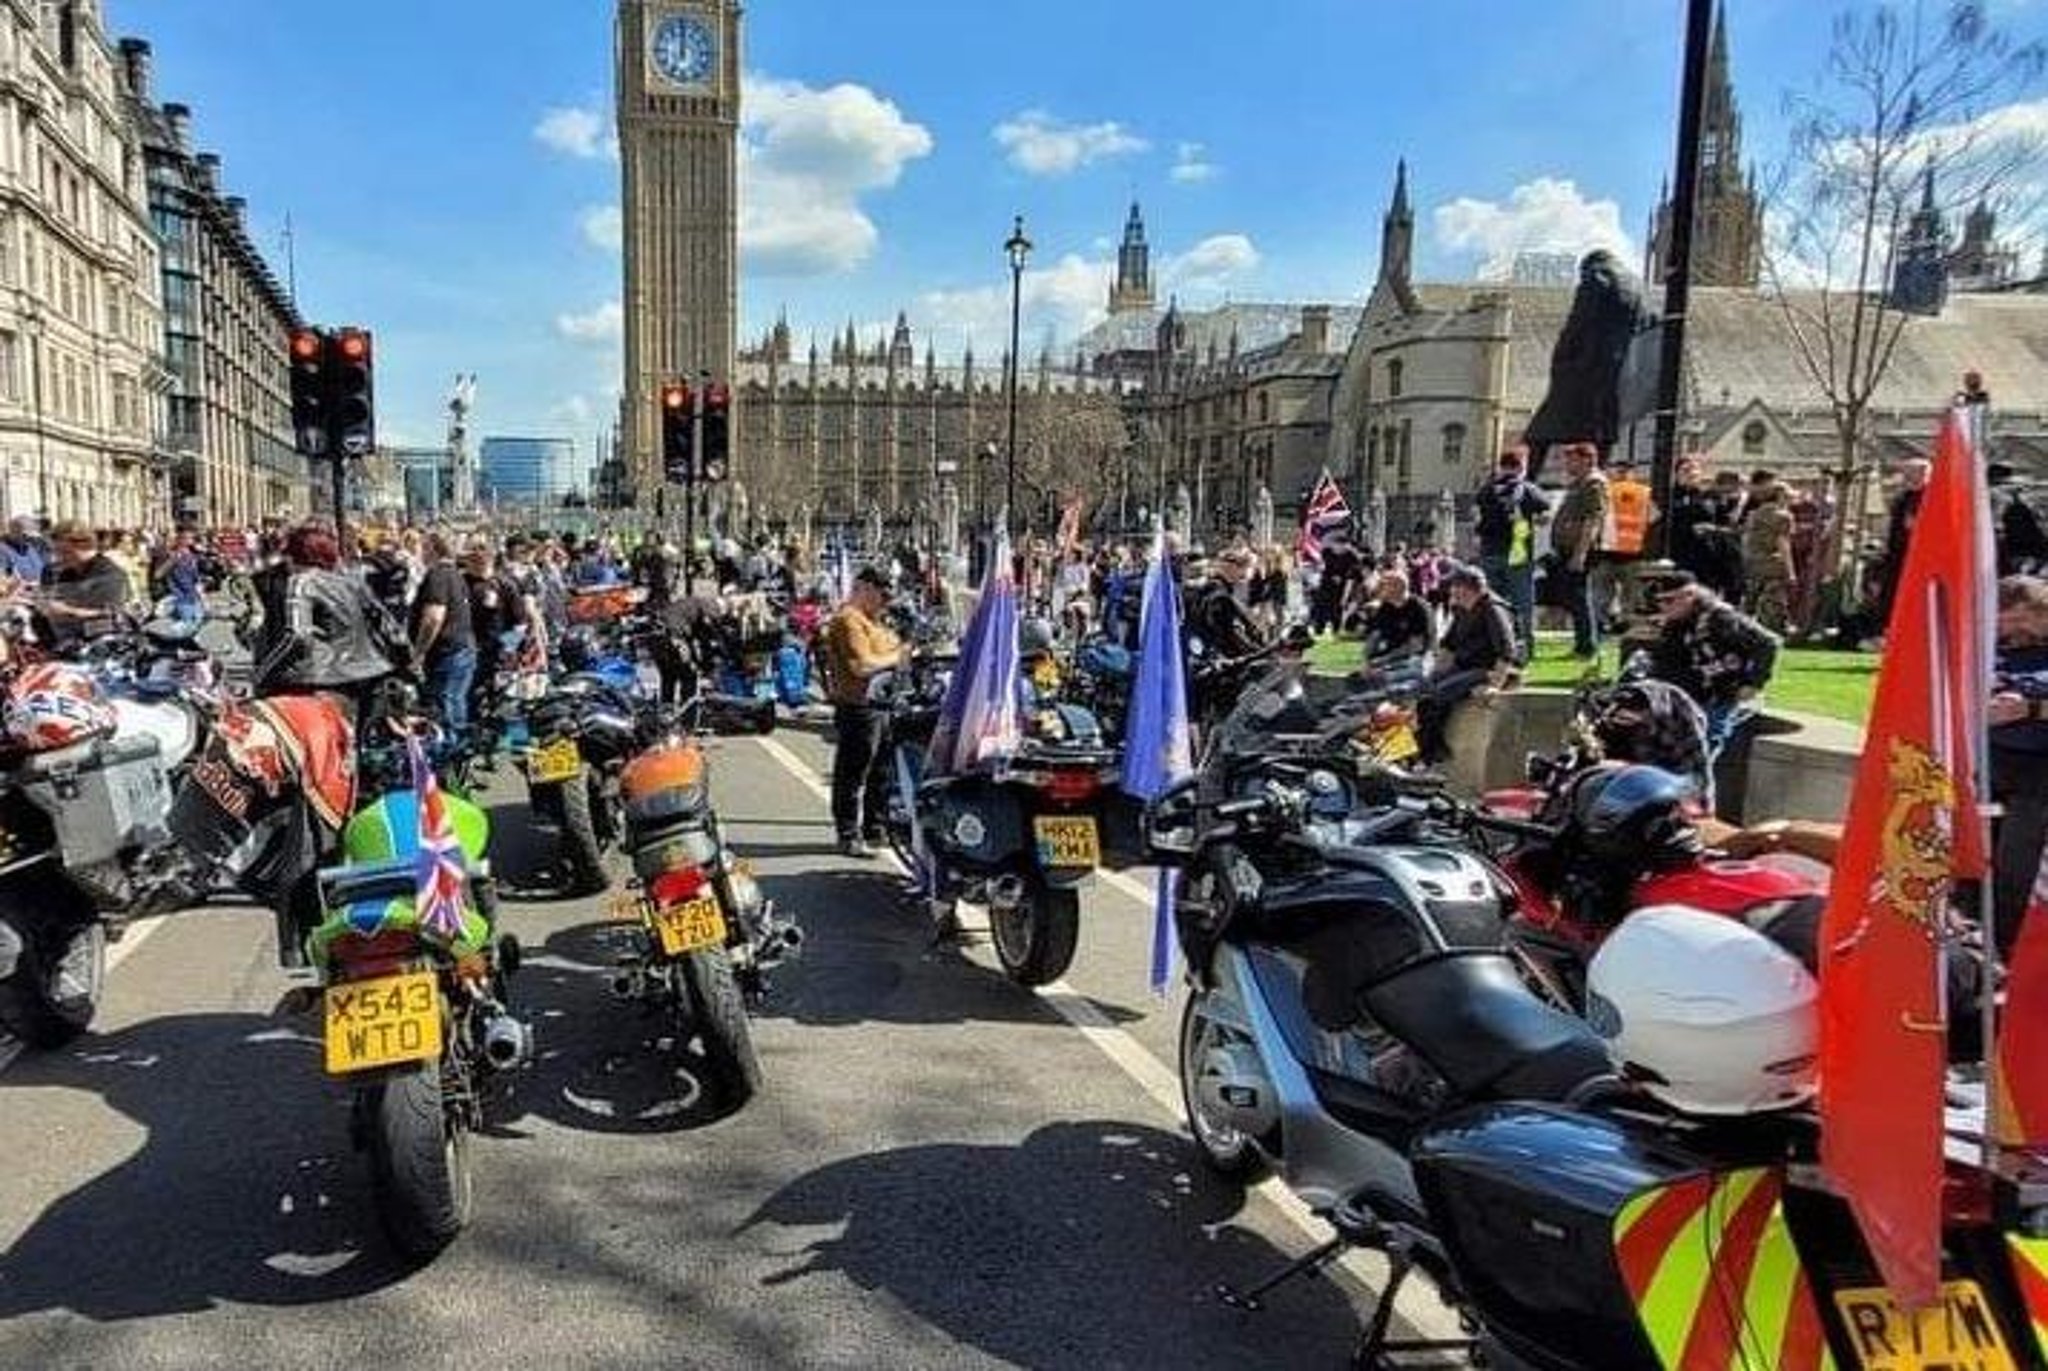 NI veterans ramp up protest activity in the heart of London